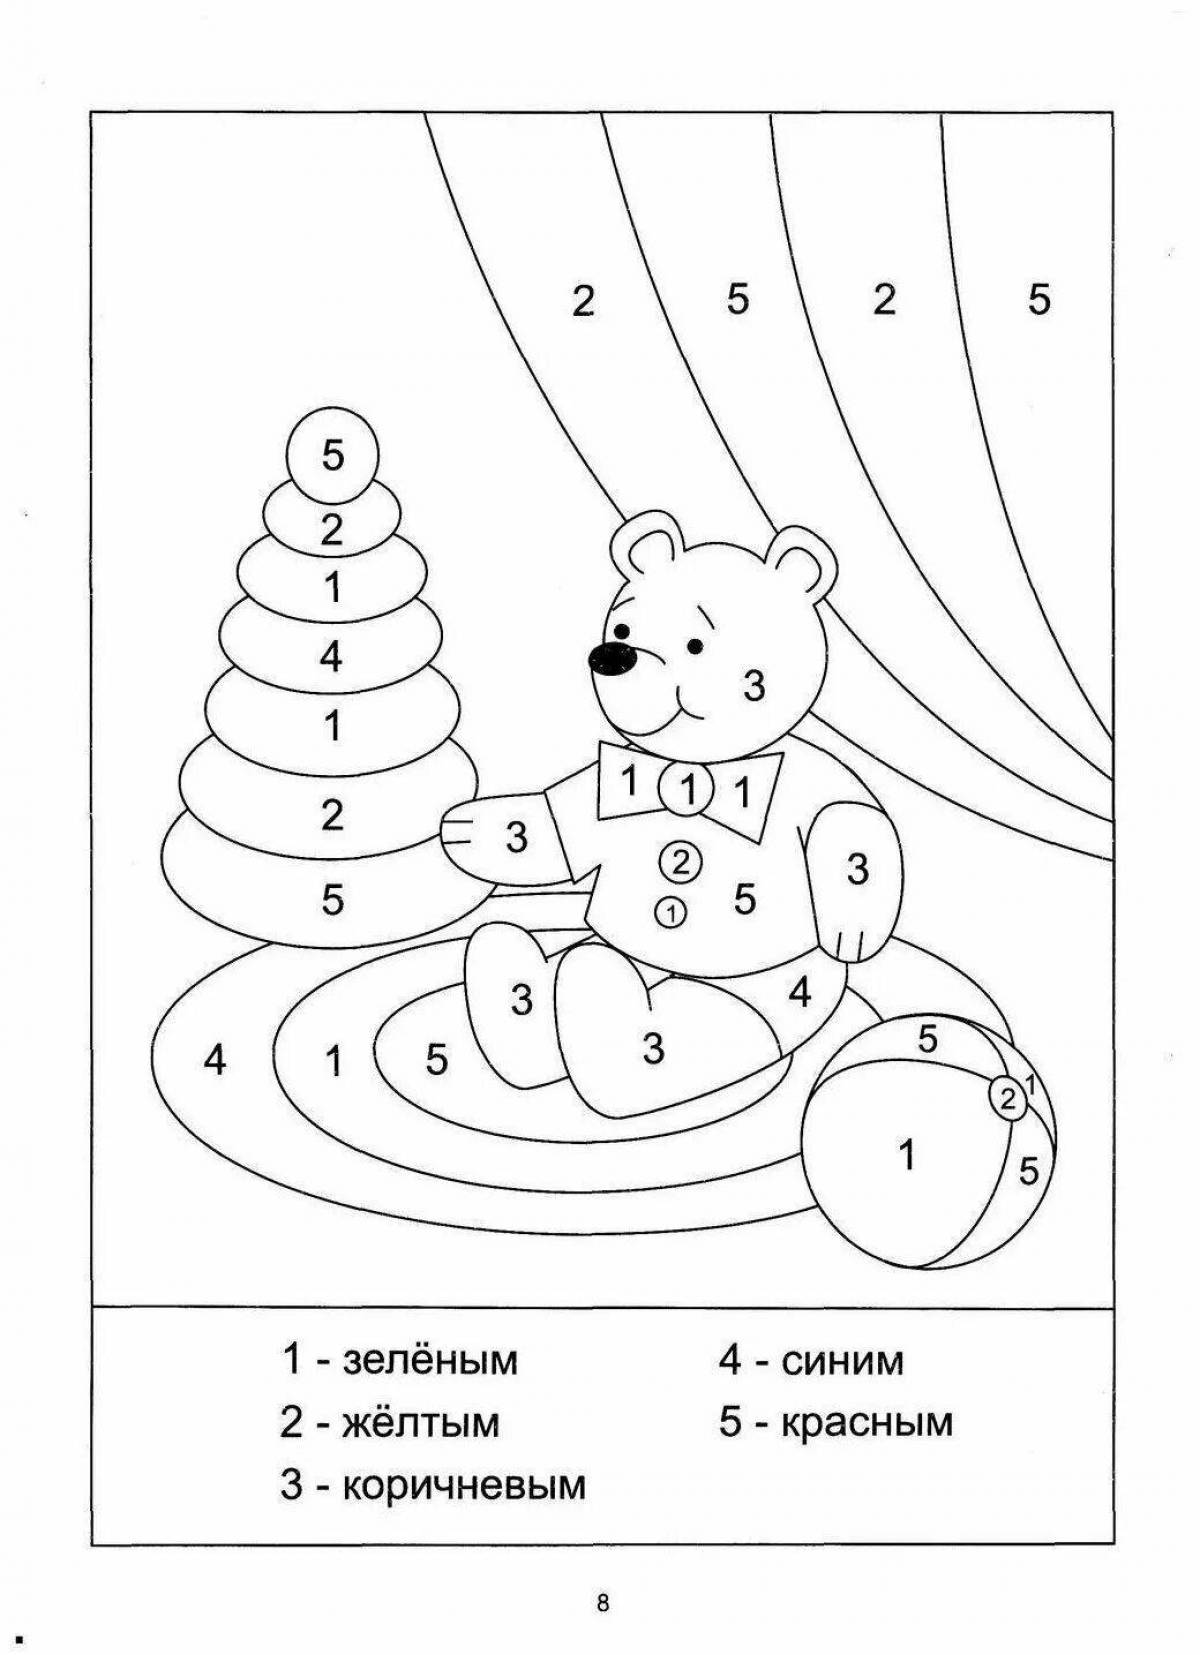 Coloring playful bear by numbers